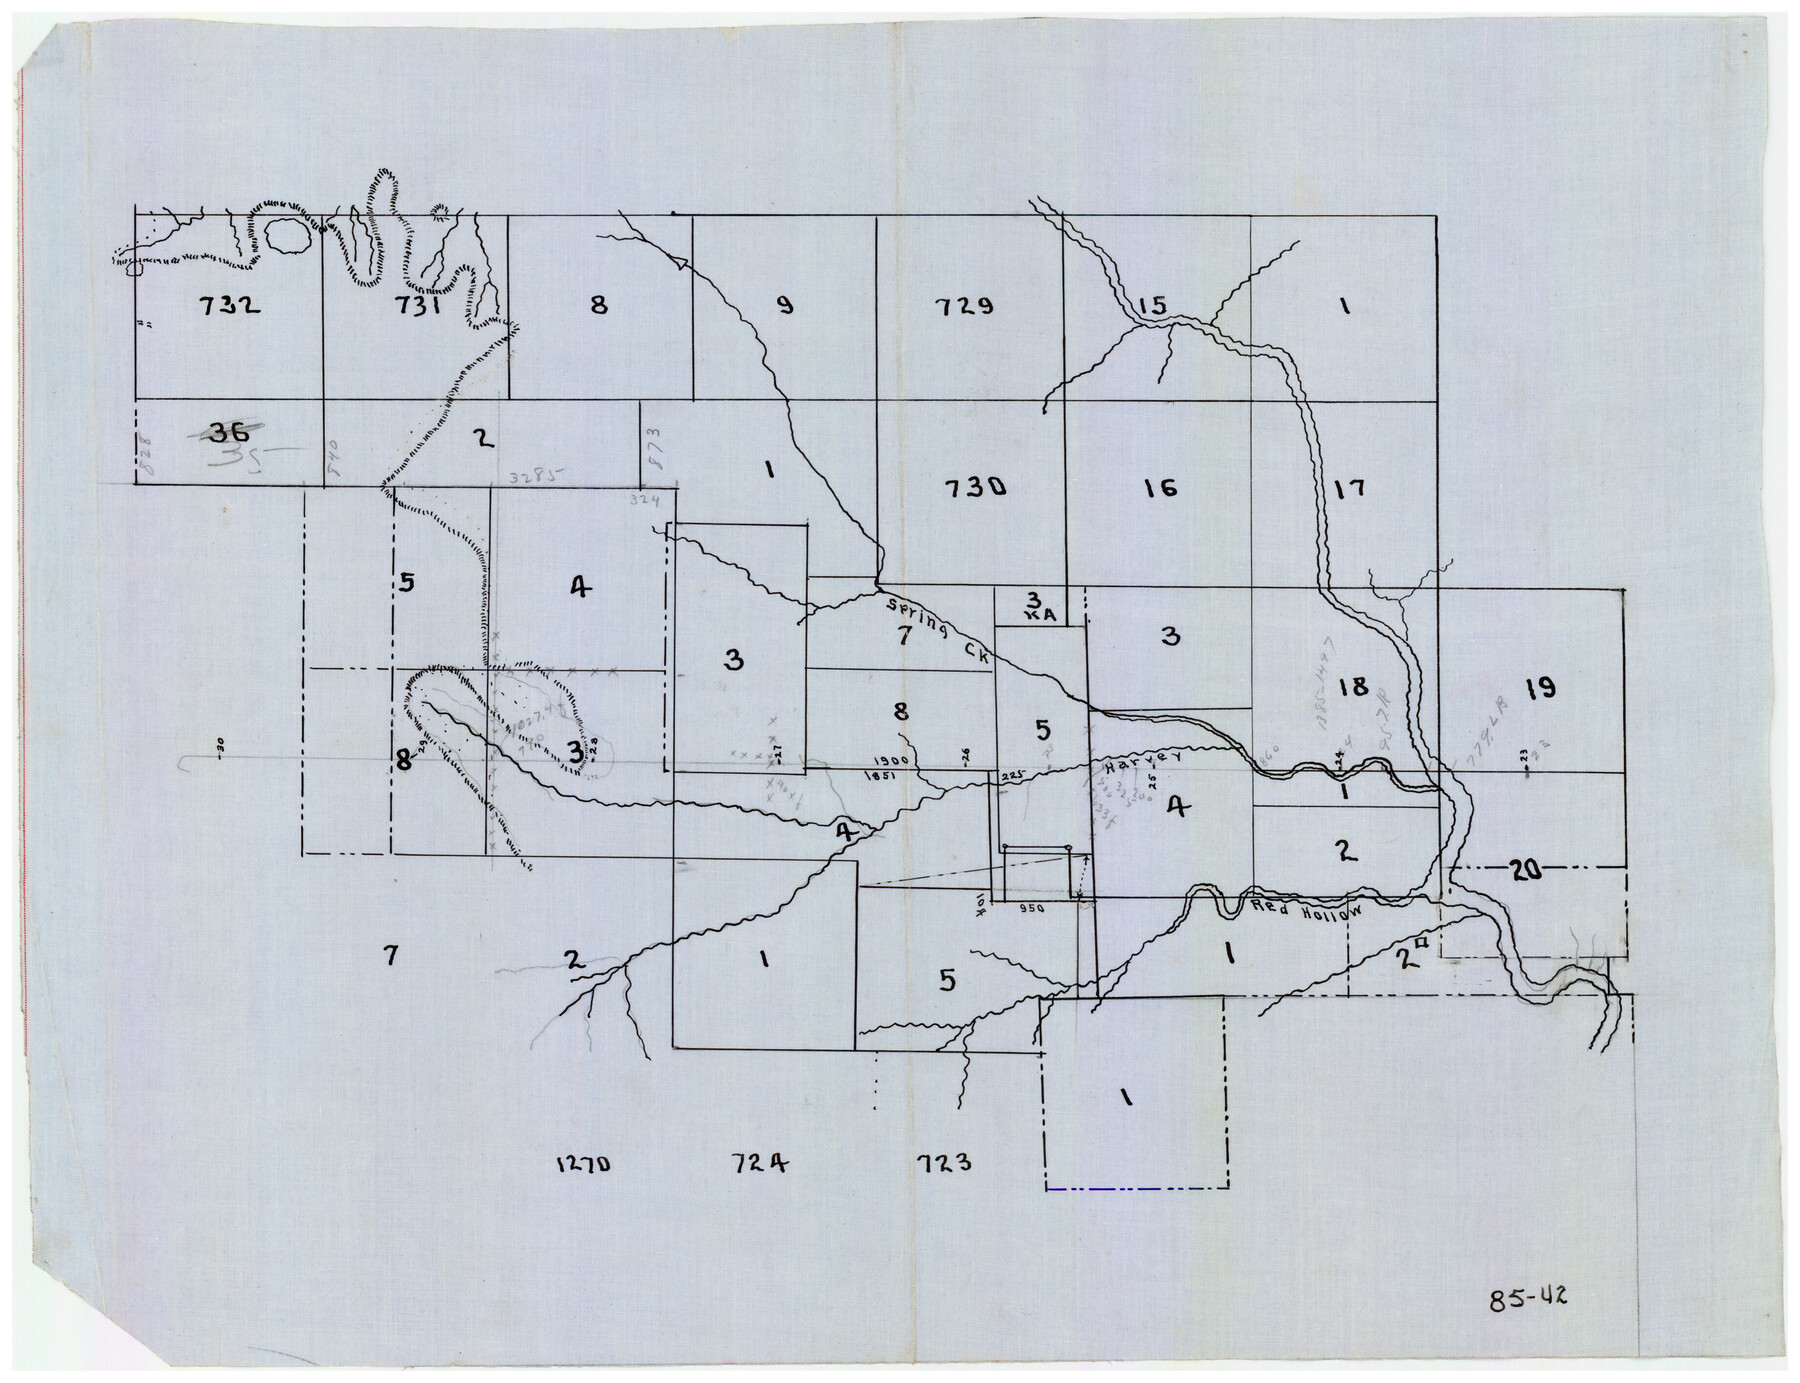 90909, [Northwest part of County showing surveys along Spring Creek, Harvey Creek, and Red Hollow Creek], Twichell Survey Records